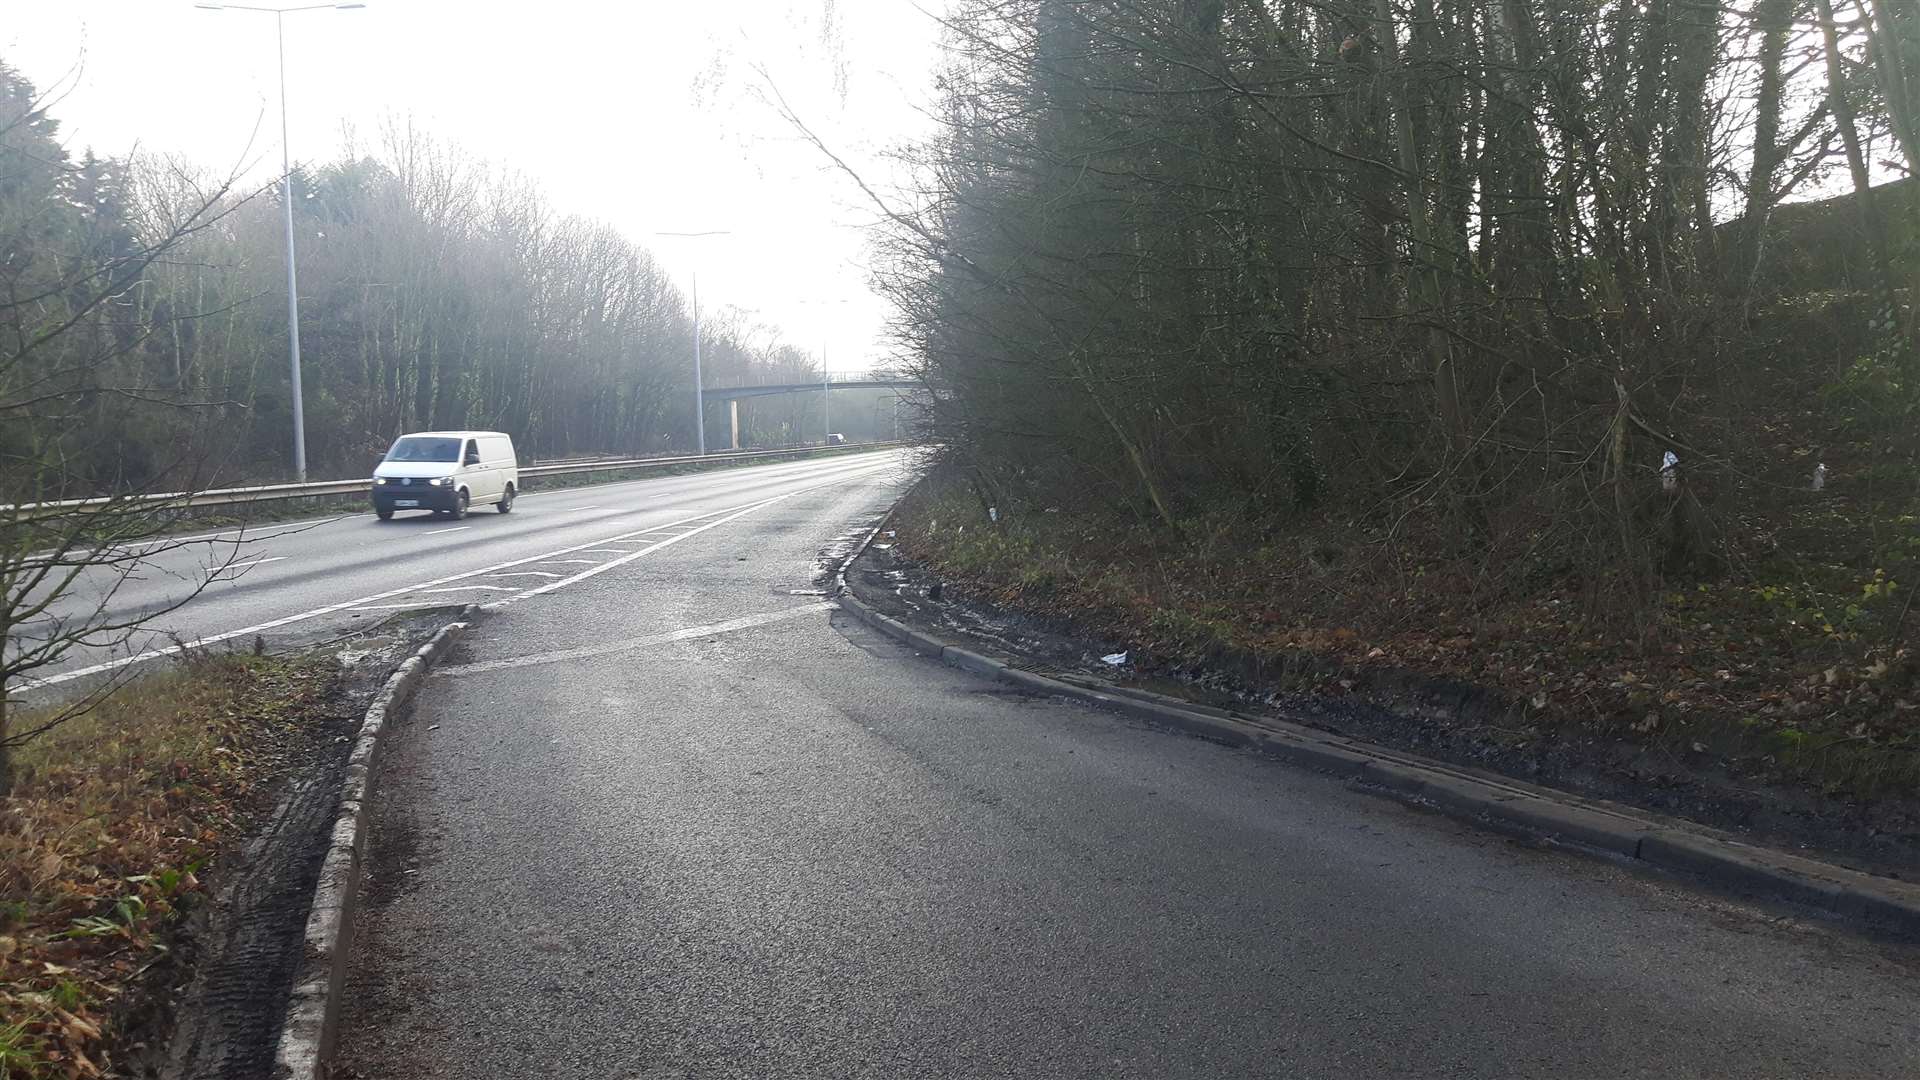 The slip road to a lay-by on the A2 where the three men died